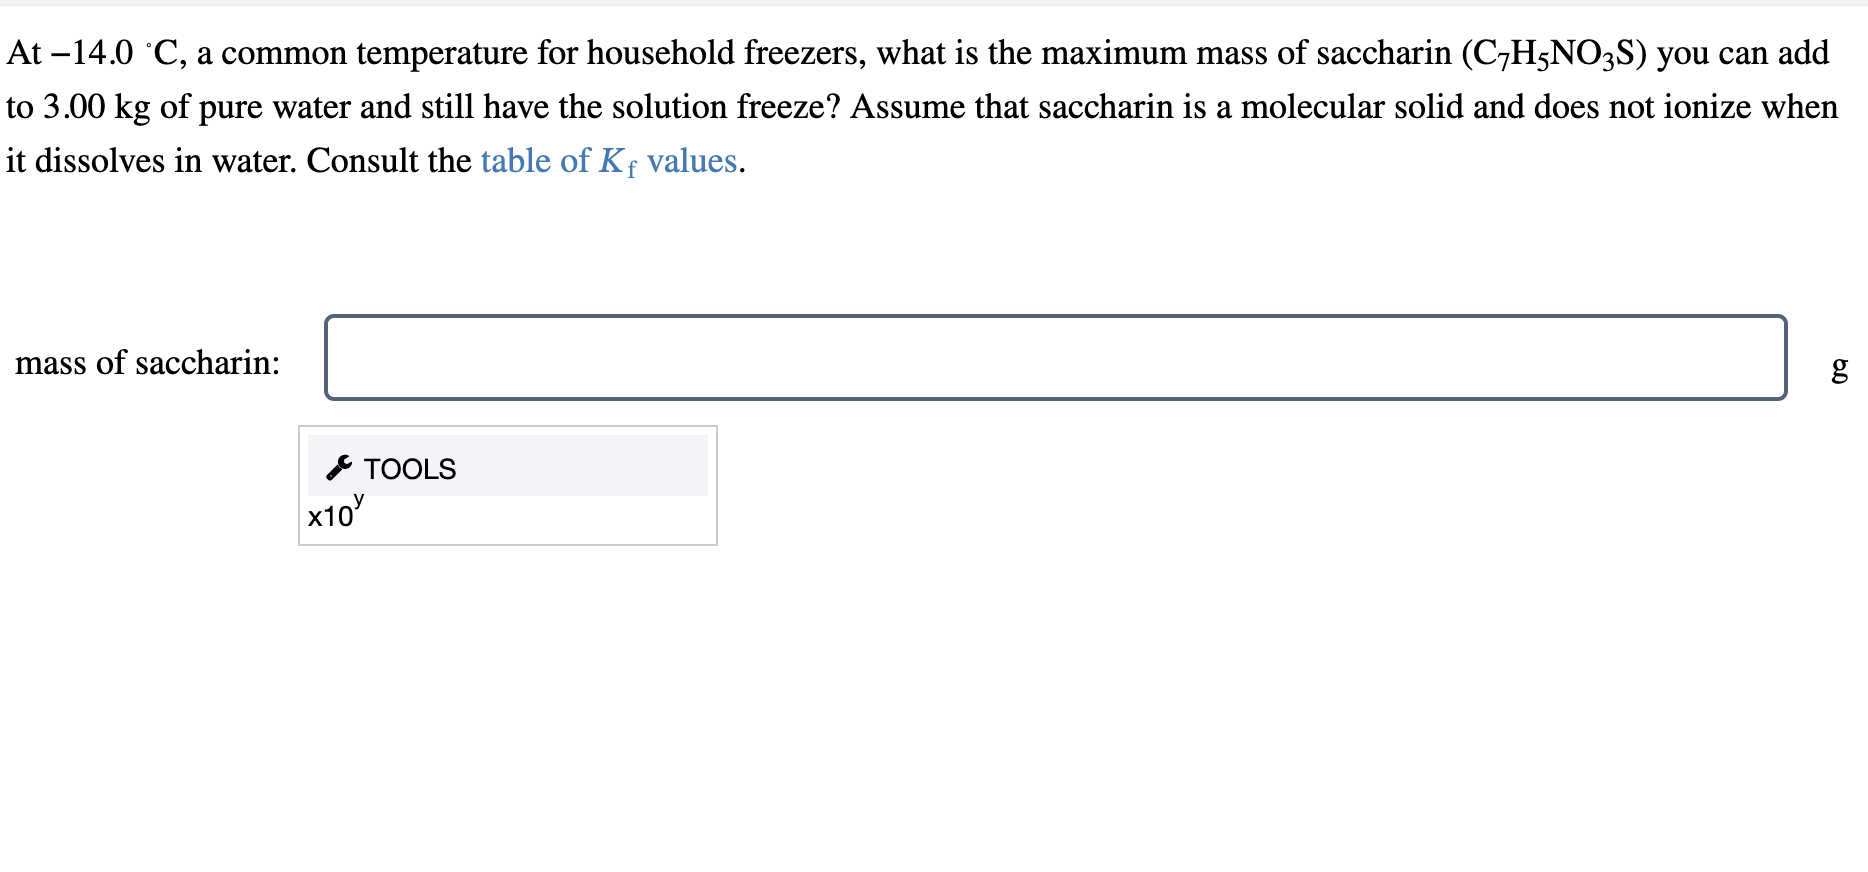 At \( -14.0{ }^{\circ} \mathrm{C} \), a common temperature for household freezers, what is the maximum mass of saccharin \( \